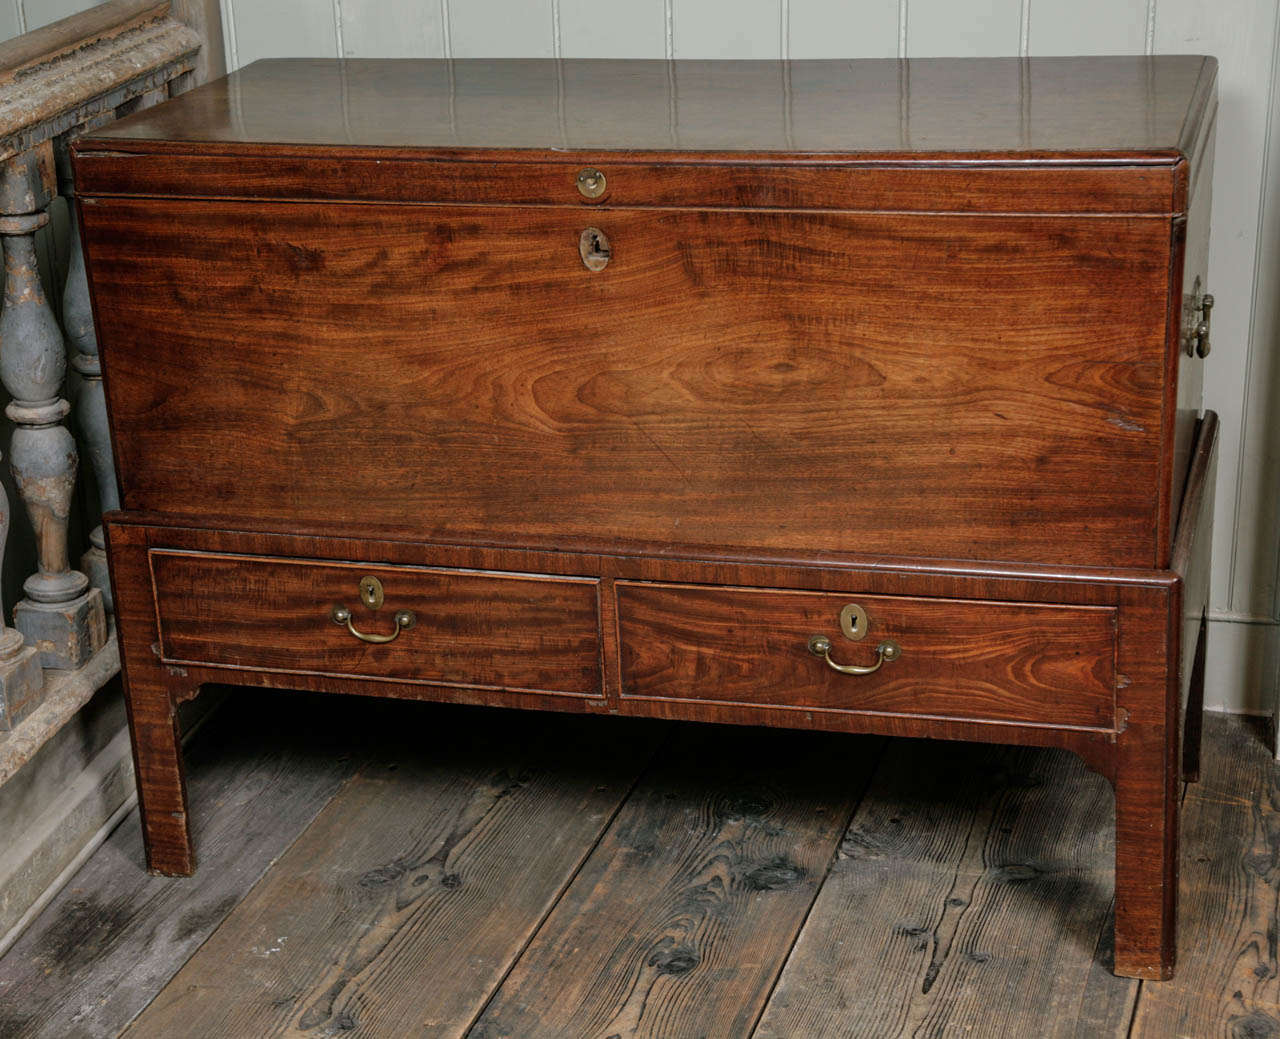 with exceptional timber having a hinged lid above two frieze drawers on squared chamfered legs. English, c. 1740